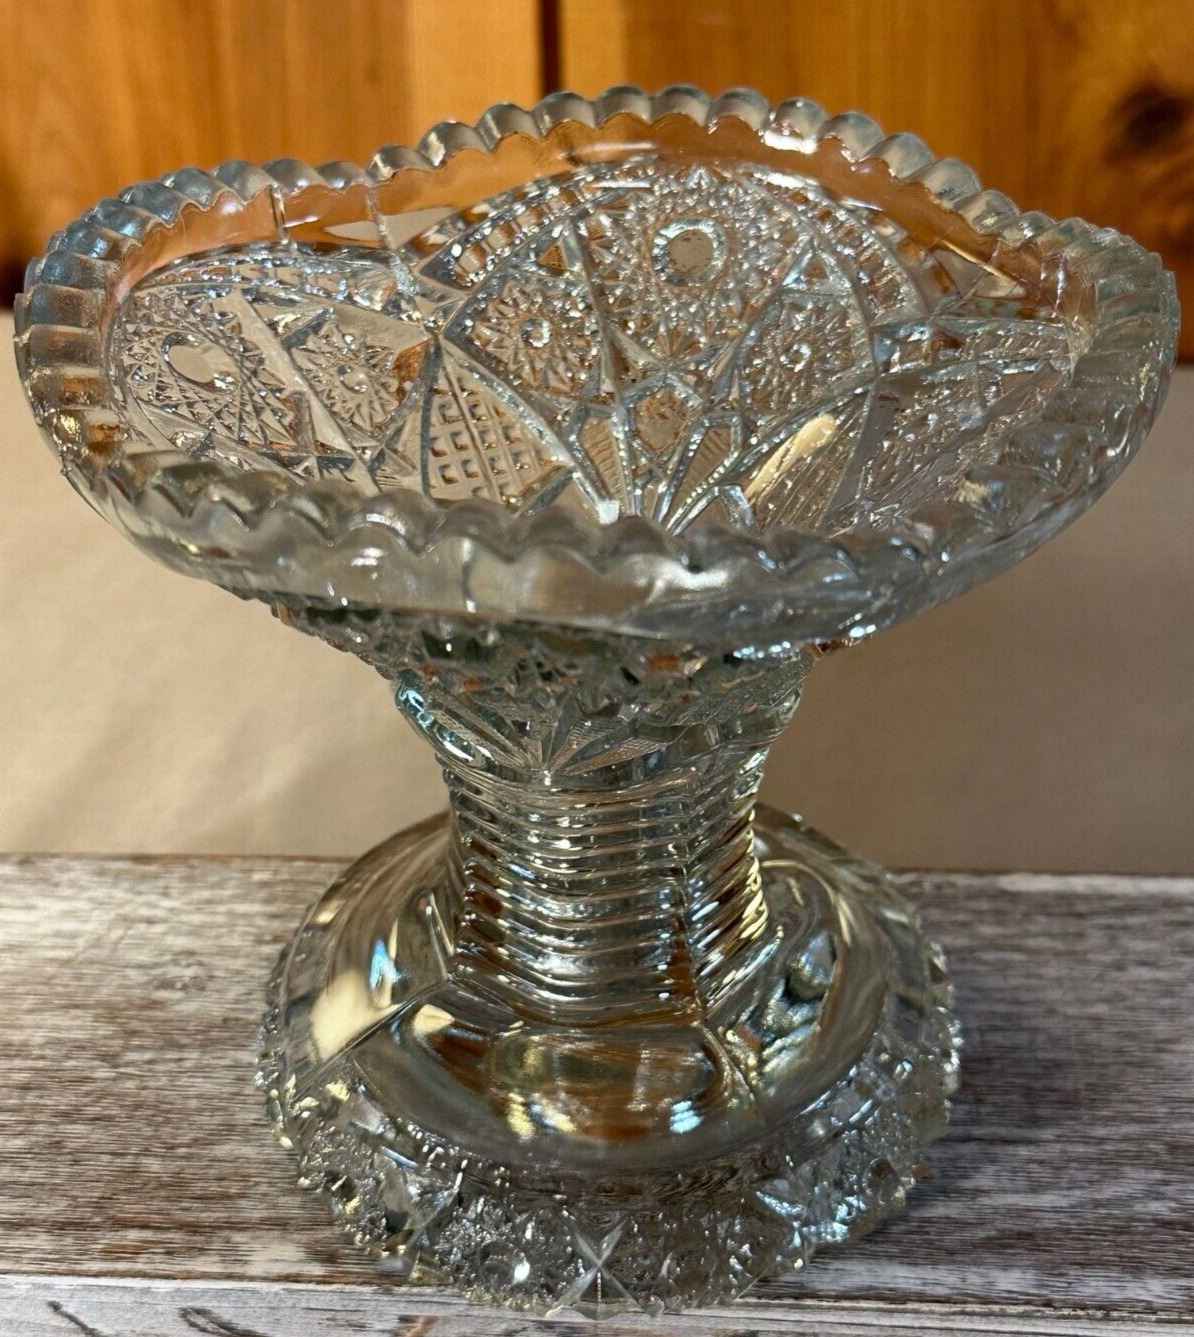 Vintage Crystal Cut Glass Bowl w/ Stem Candy Dish Goblet Thick Sturdy Well Made